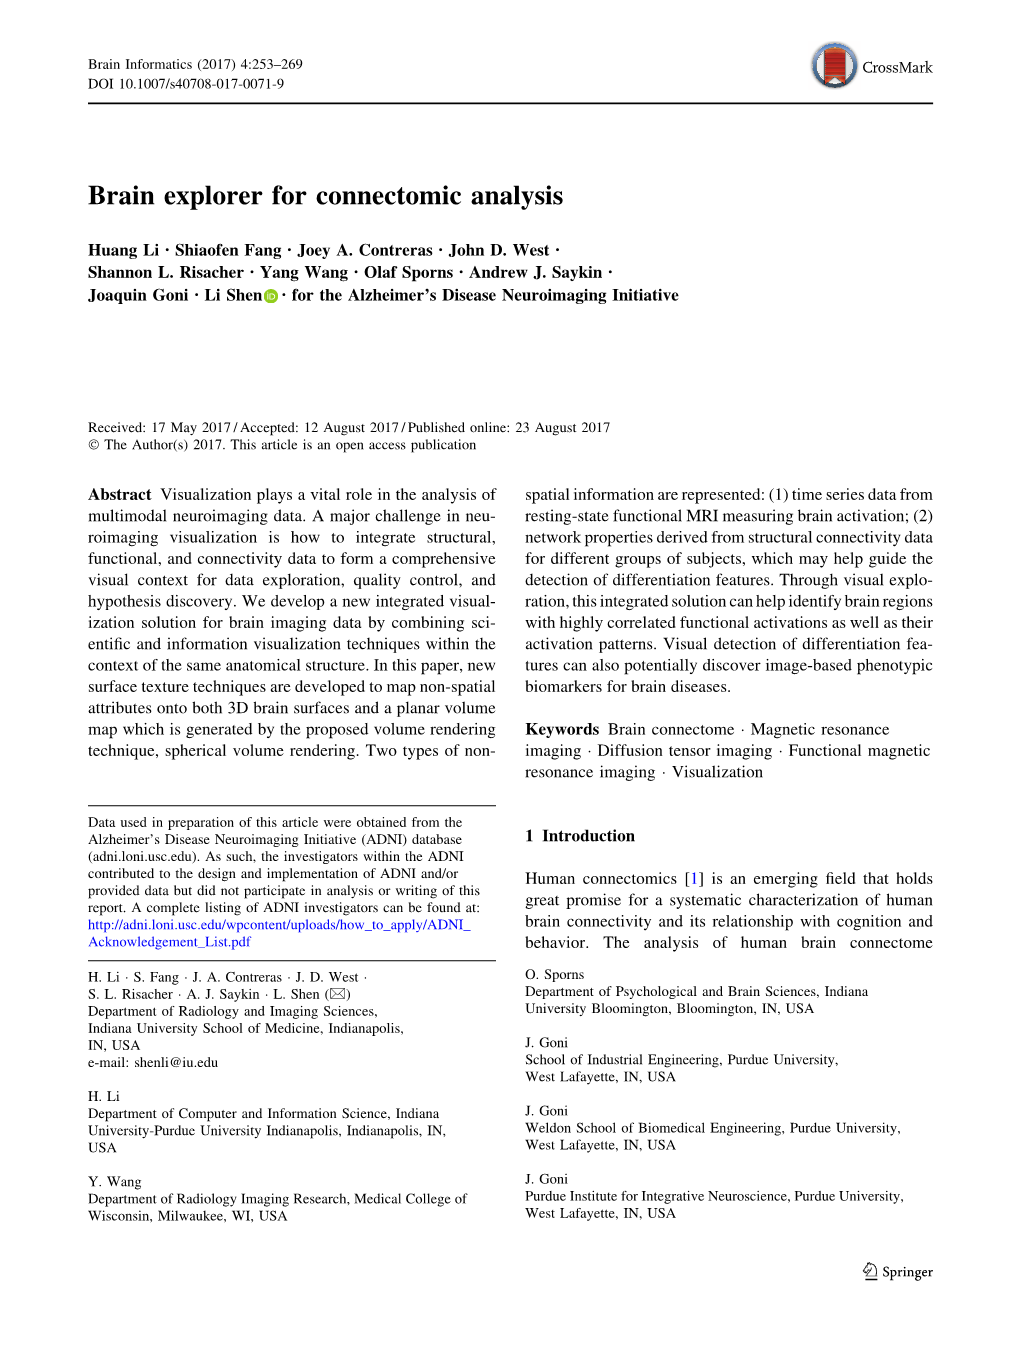 Brain Explorer for Connectomic Analysis